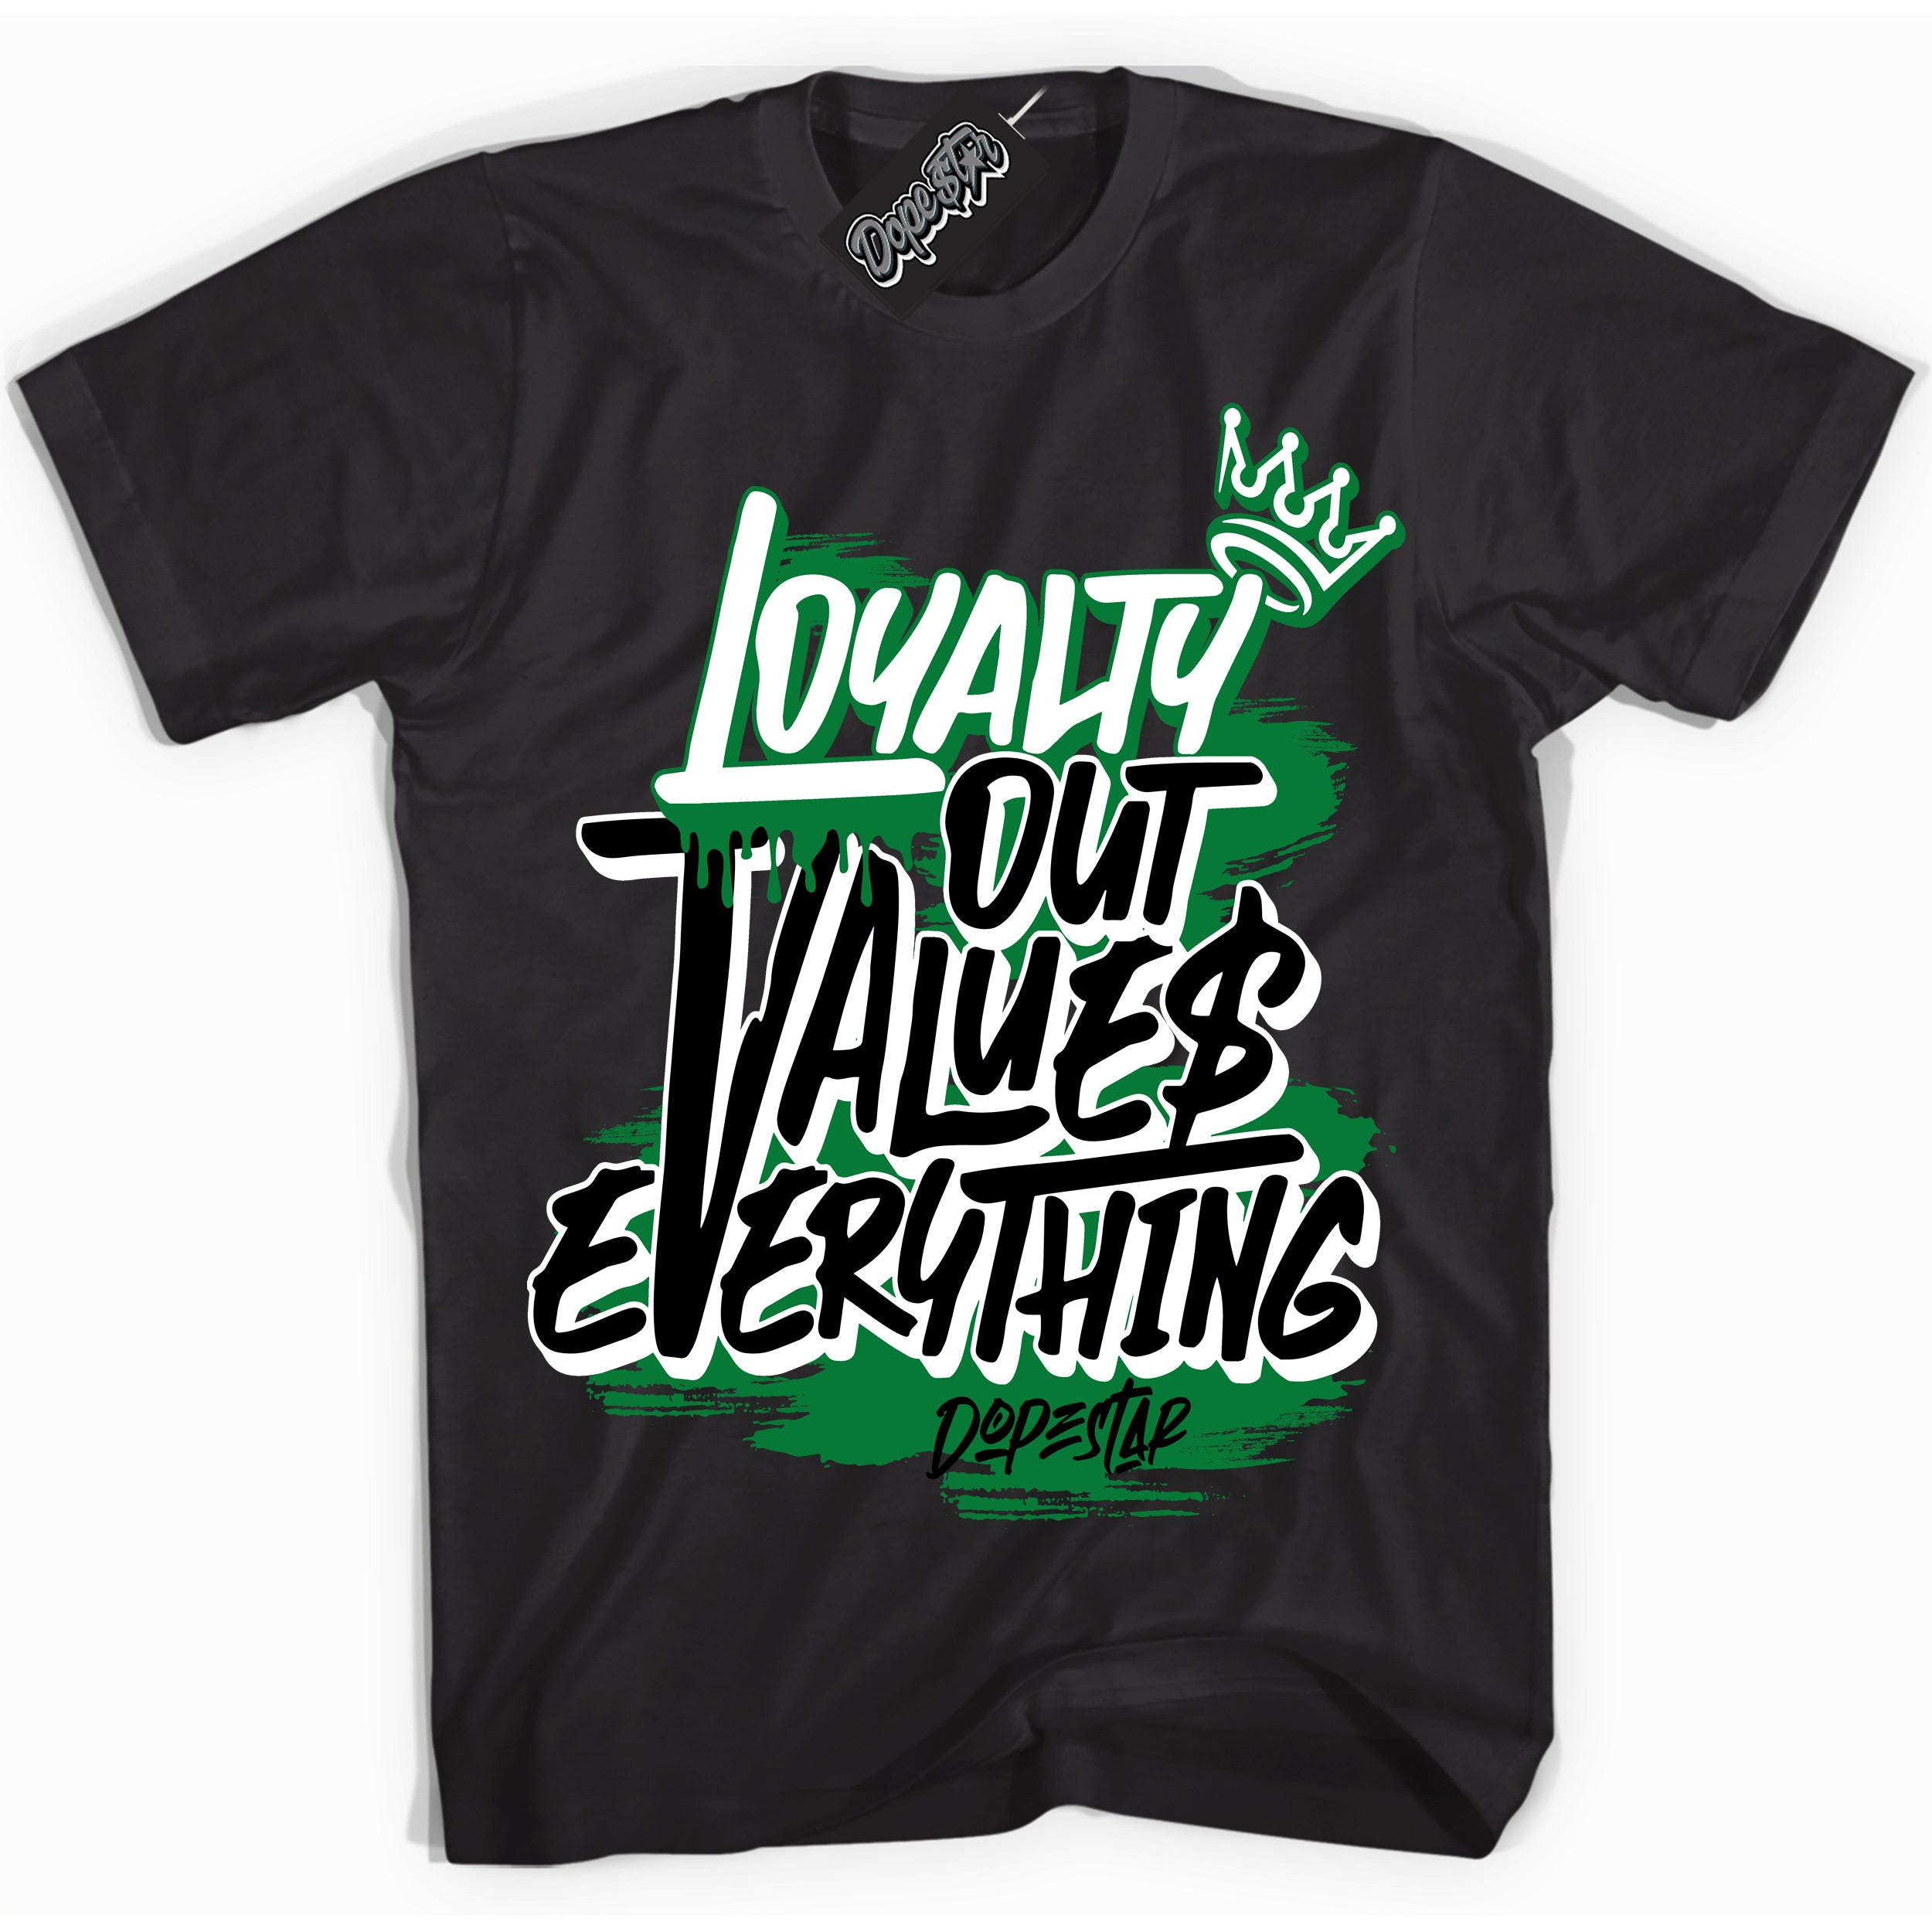 Cool Black Shirt with “ Loyalty Out Values Everything” design that perfectly matches Rings Lucky Green 6s Sneakers.